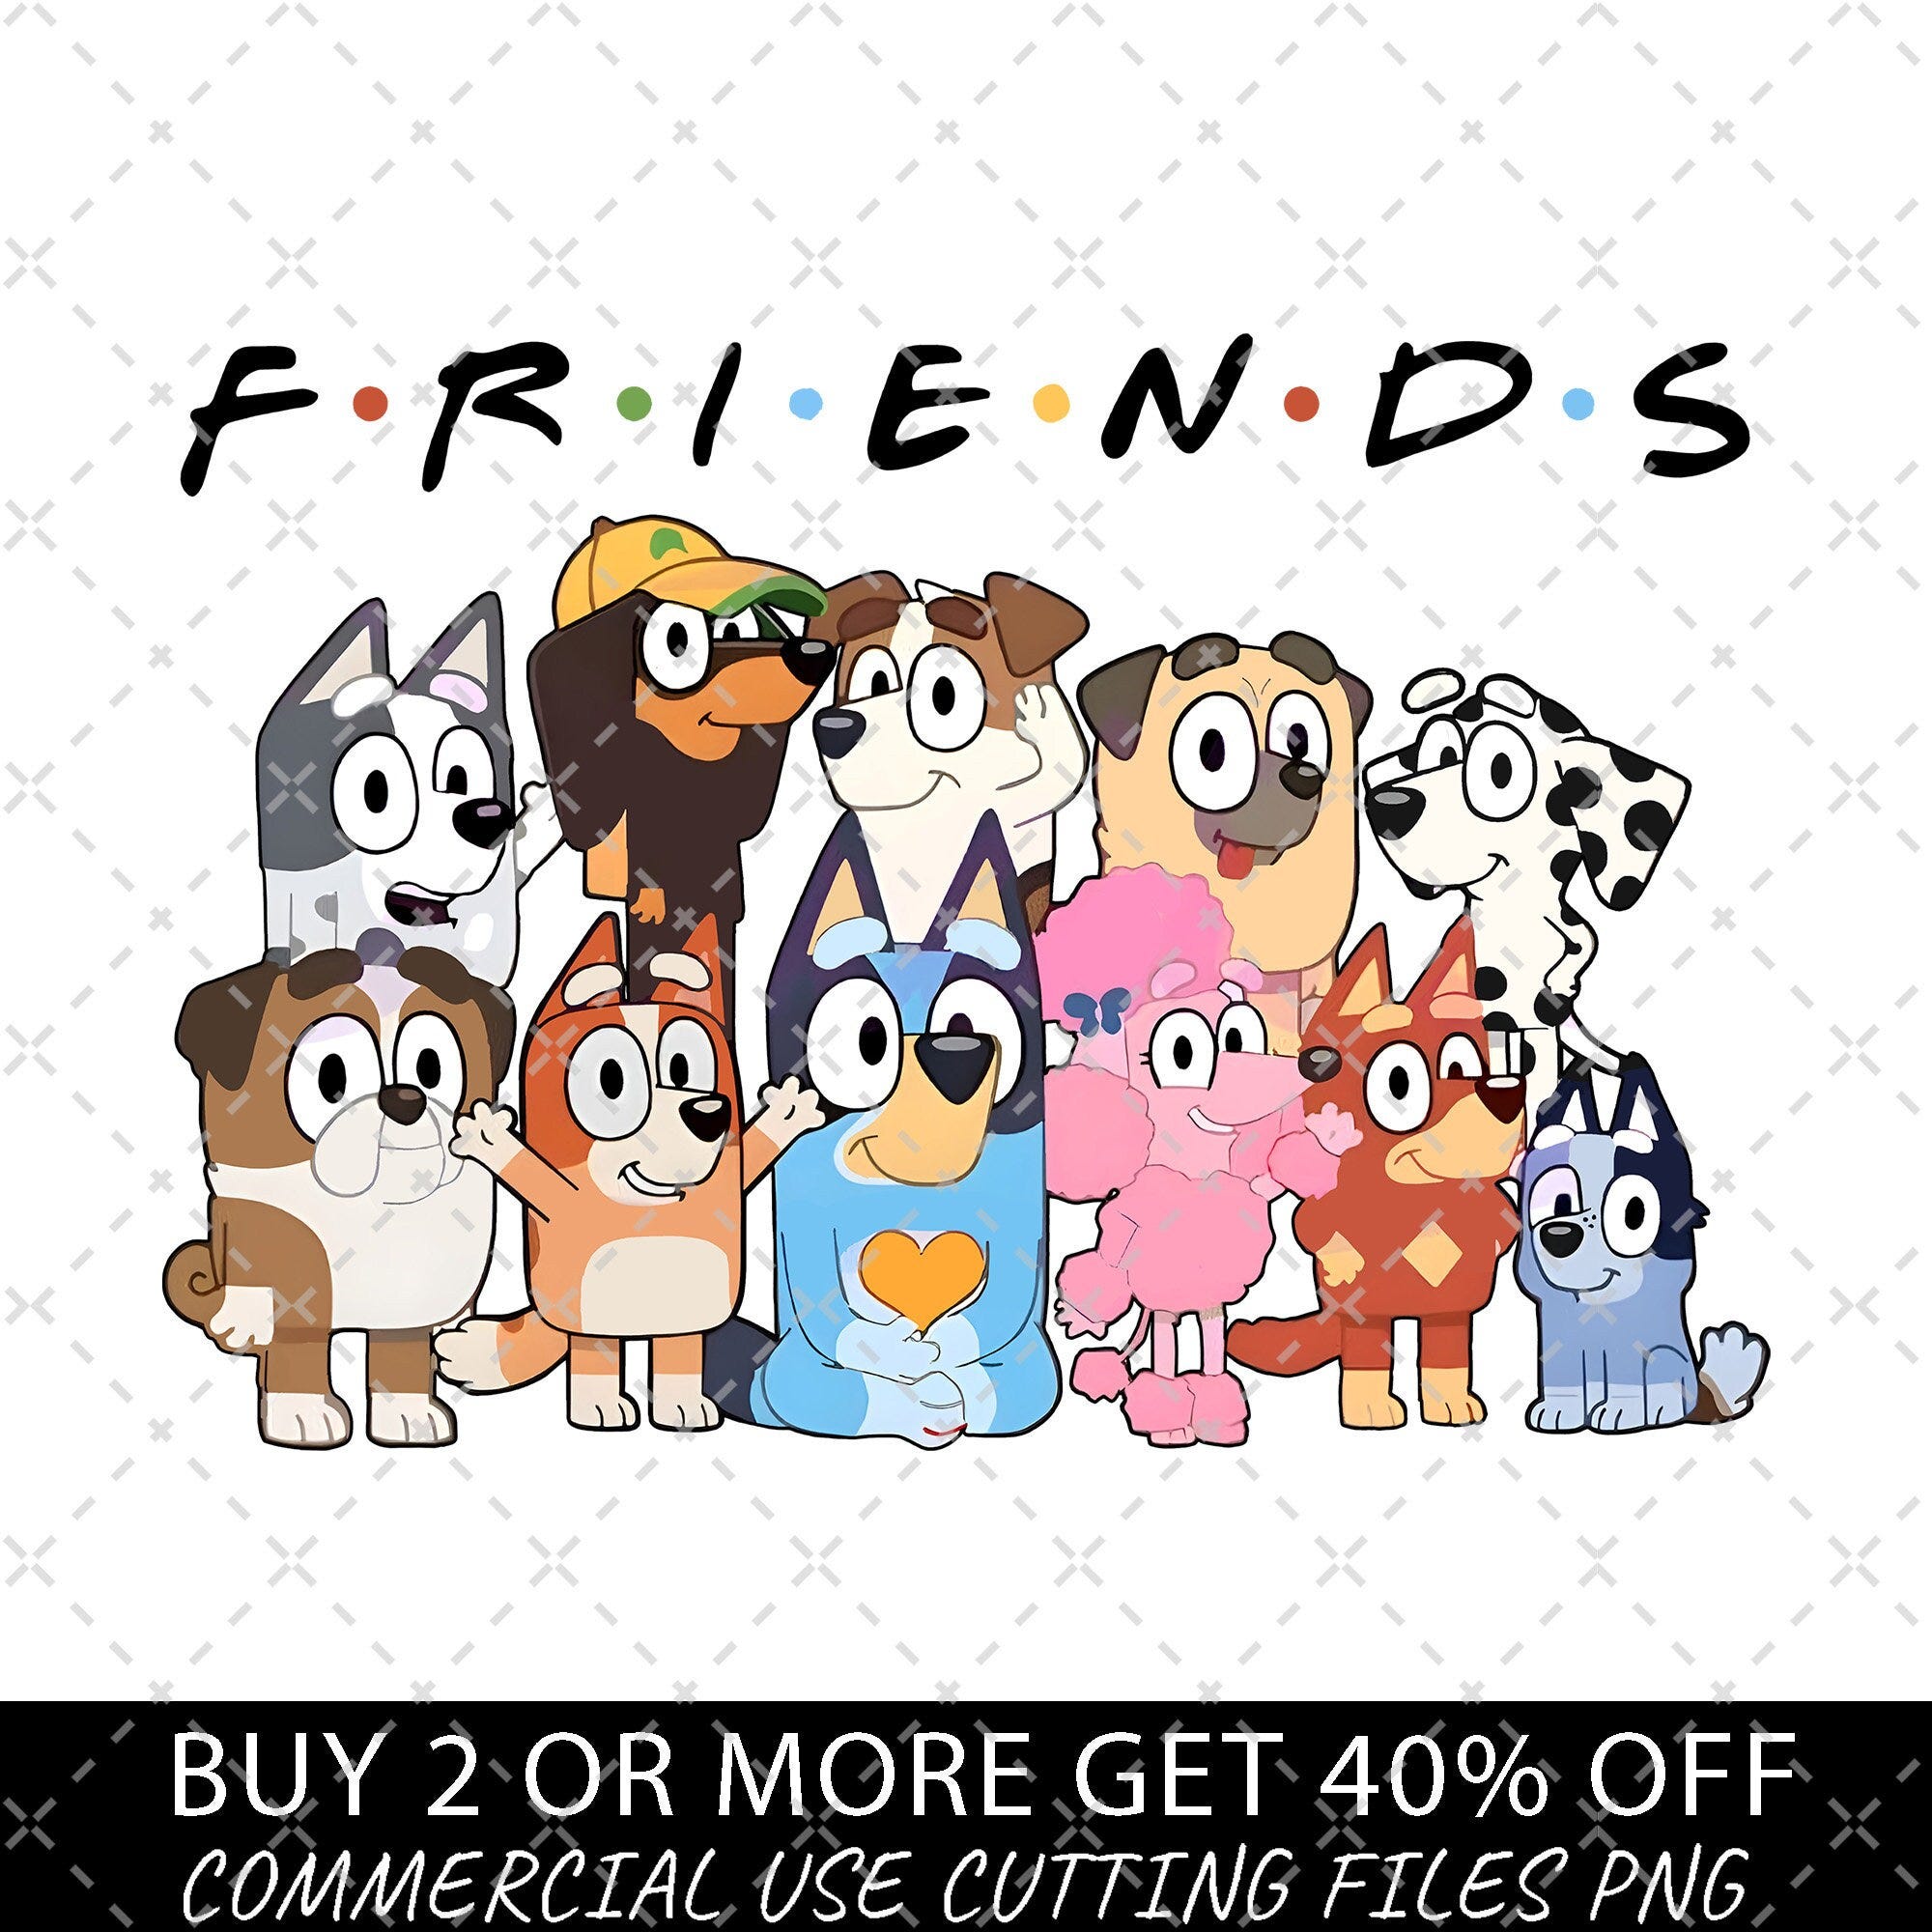 Bluey Friends PNG, Bluey Family Png, Decal Files, Vinyl Stickers, Car Image, Bluey Dad PNG, Bluey Mom Png, Bluey Friends, Bluey Png